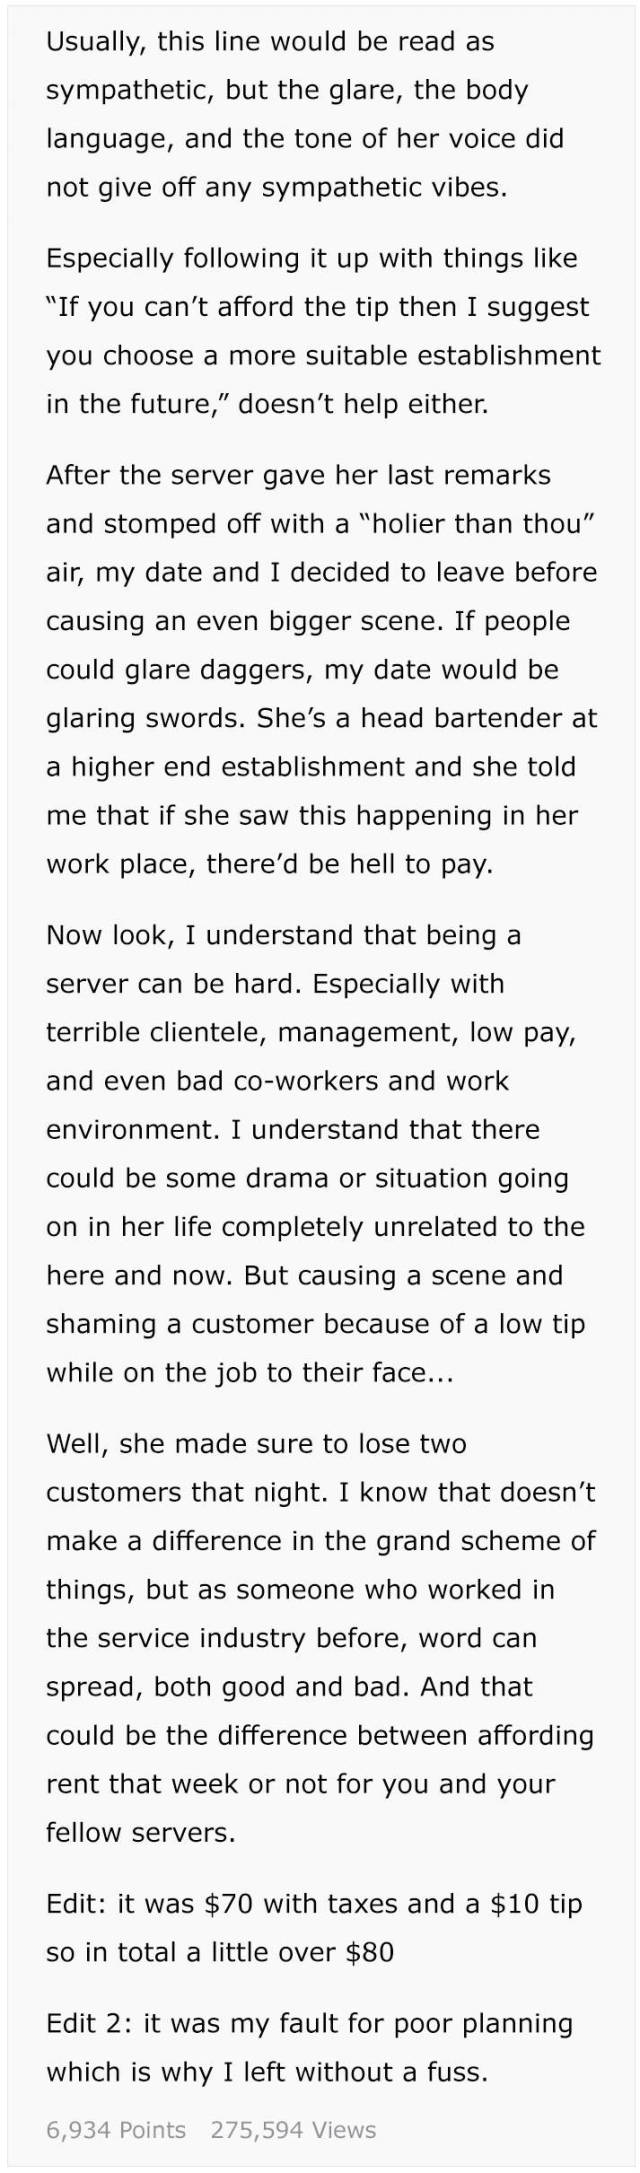 Waitress Ruins Guy’s Date Because Of “Too Small Of A Tip”